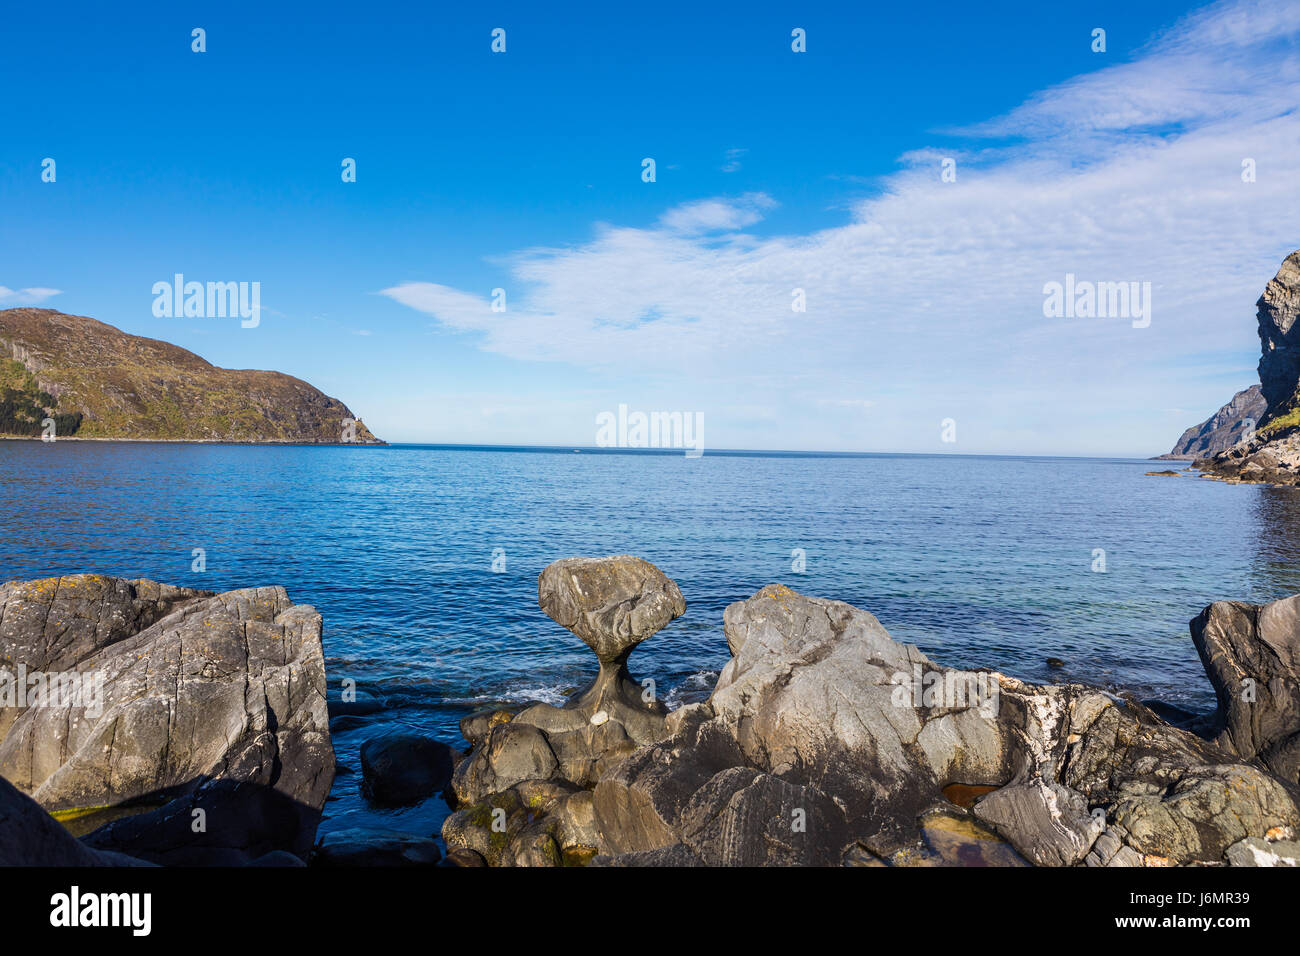 Kannesteinen is a special shaped stone located on the shore of Oppedal. Stock Photo